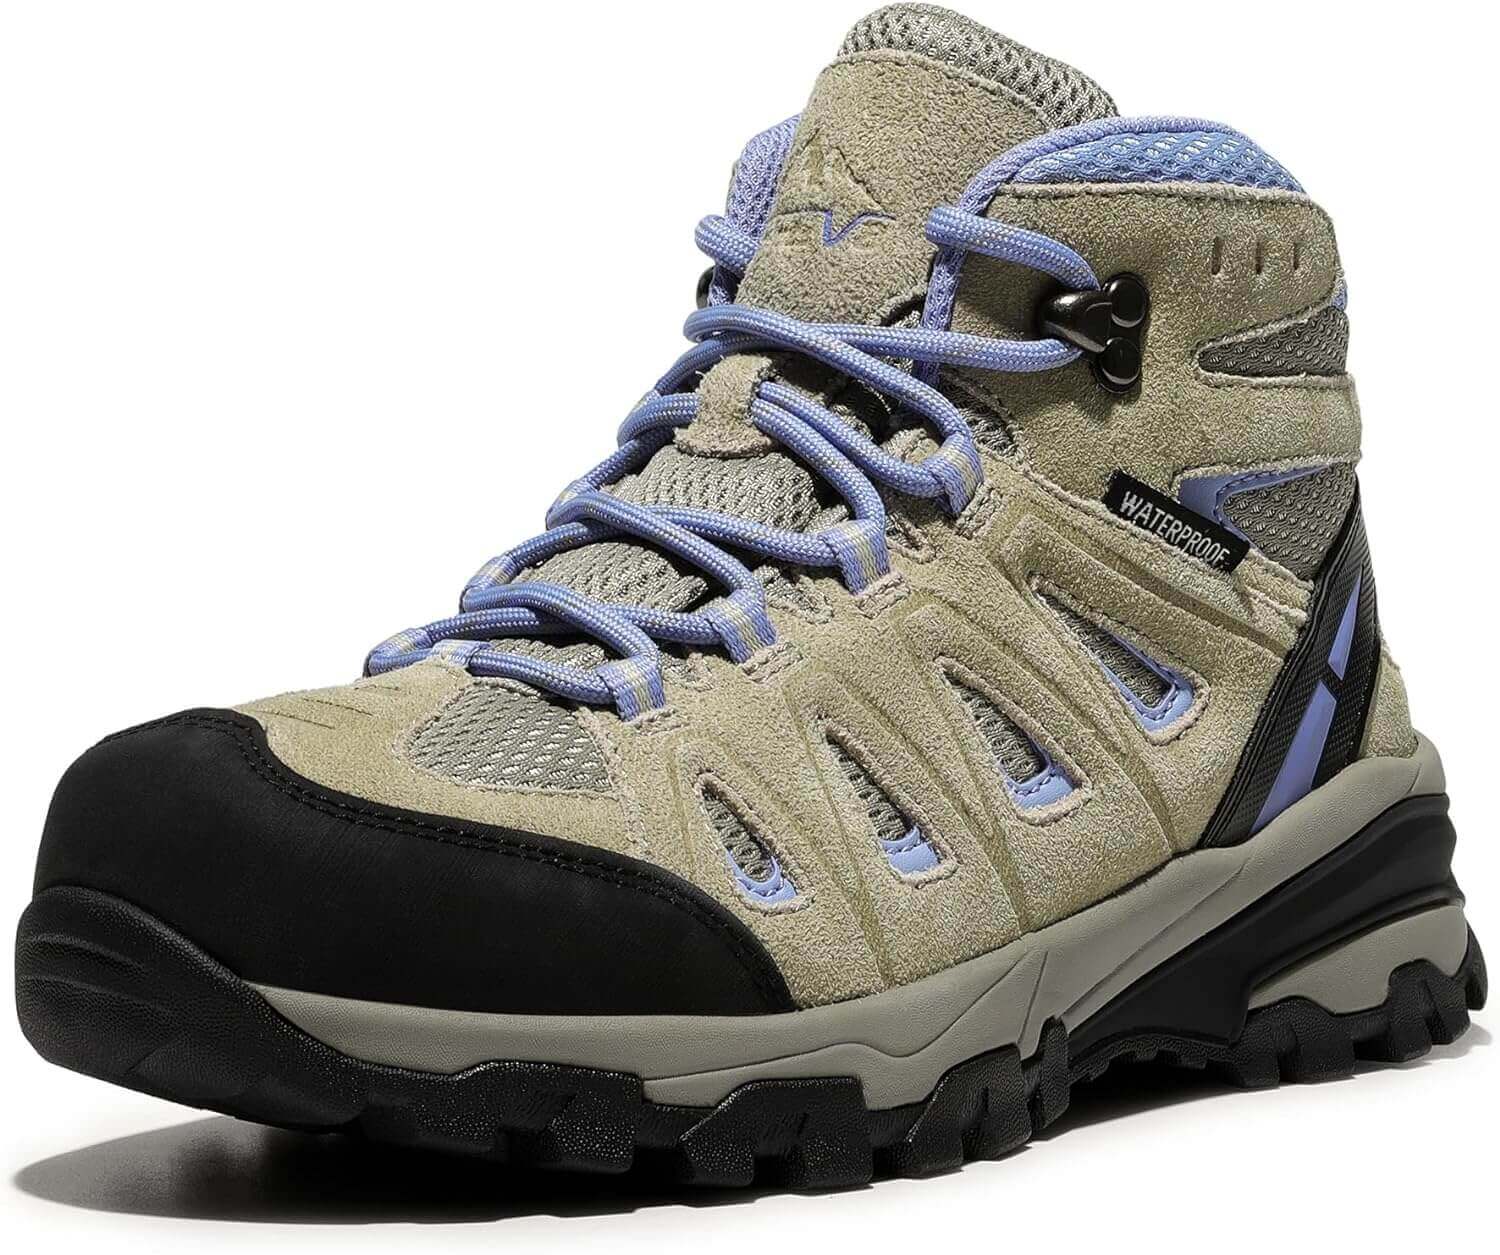 Shop The Latest >NORTIV 8 Women's Waterproof Trail Hiking Boots > *Only $78.39*> From The Top Brand > *NORTIV 8l* > Shop Now and Get Free Shipping On Orders Over $45.00 >*Shop Earth Foot*